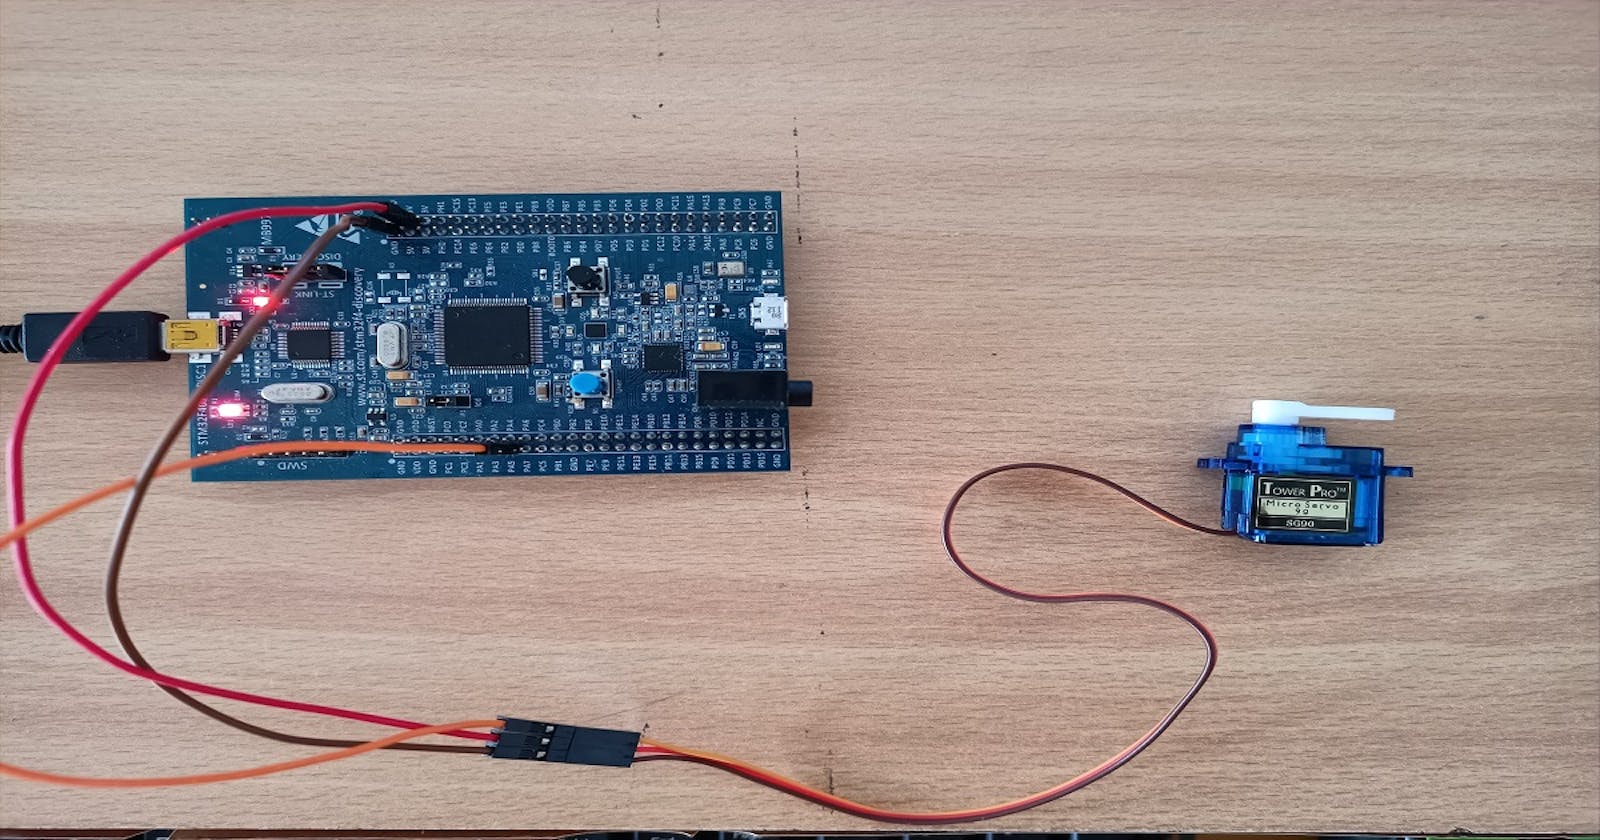 Generating PWM pulses on the STM32F407 for Servo Motor Control using Bare-Metal Programming